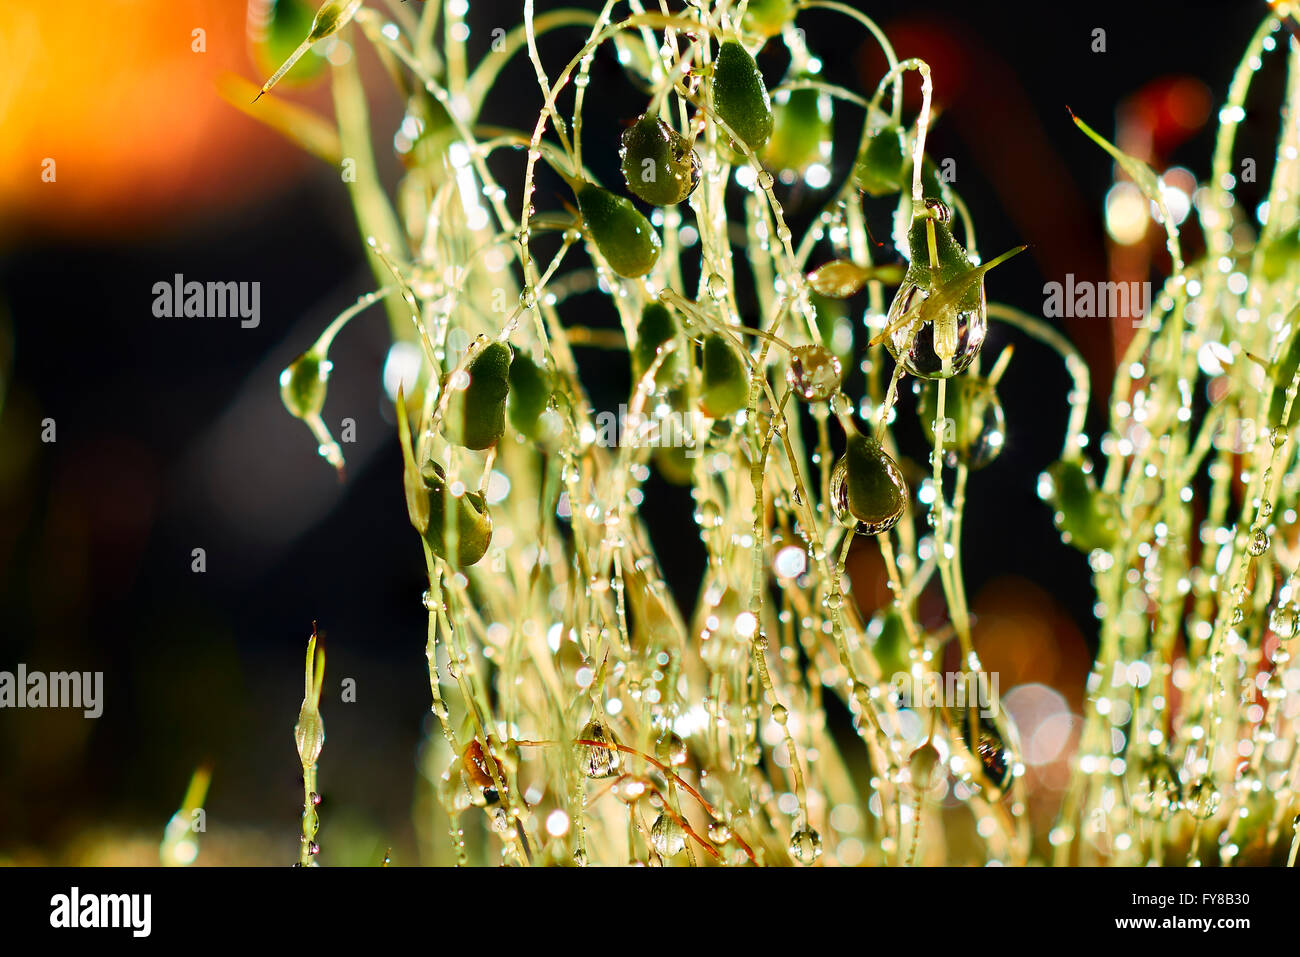 Drops of Water on the Grass at night Stock Photo